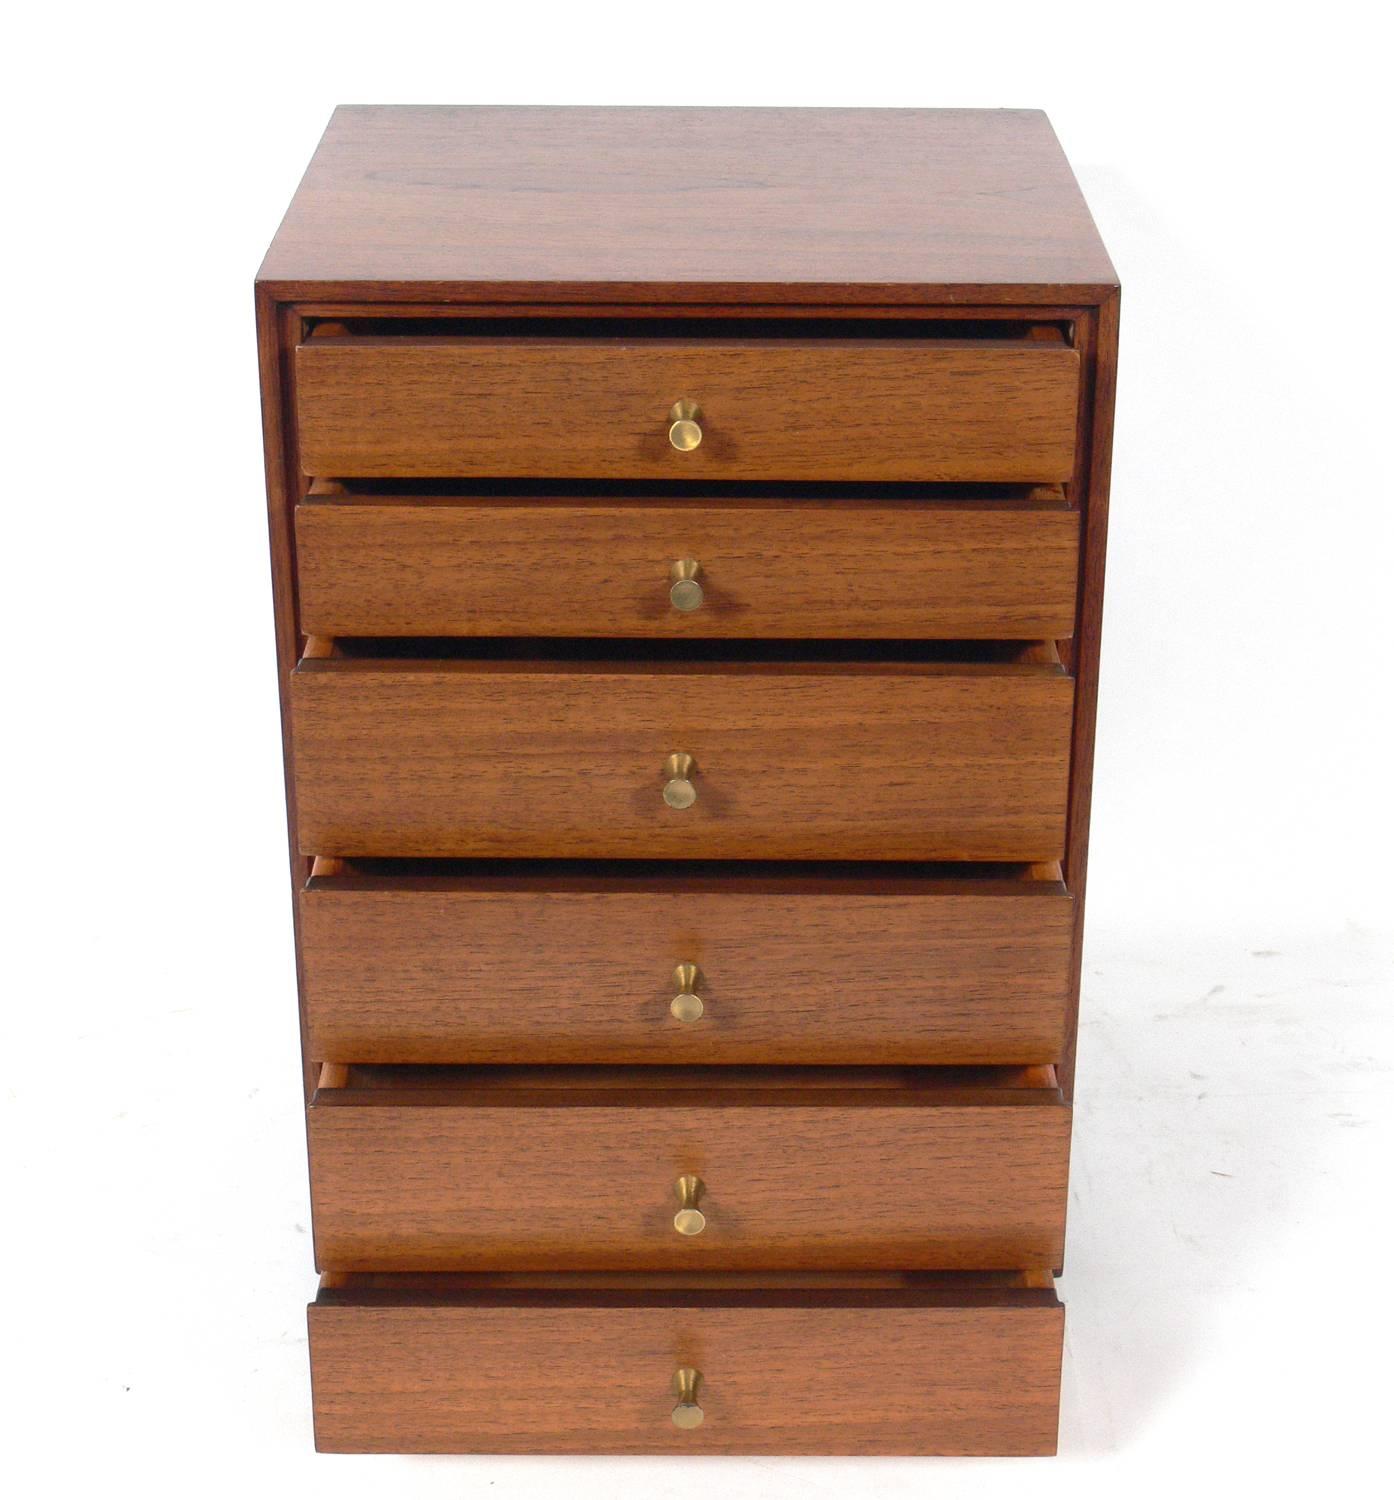 American Paul McCobb Style Jewelry Box or Chest